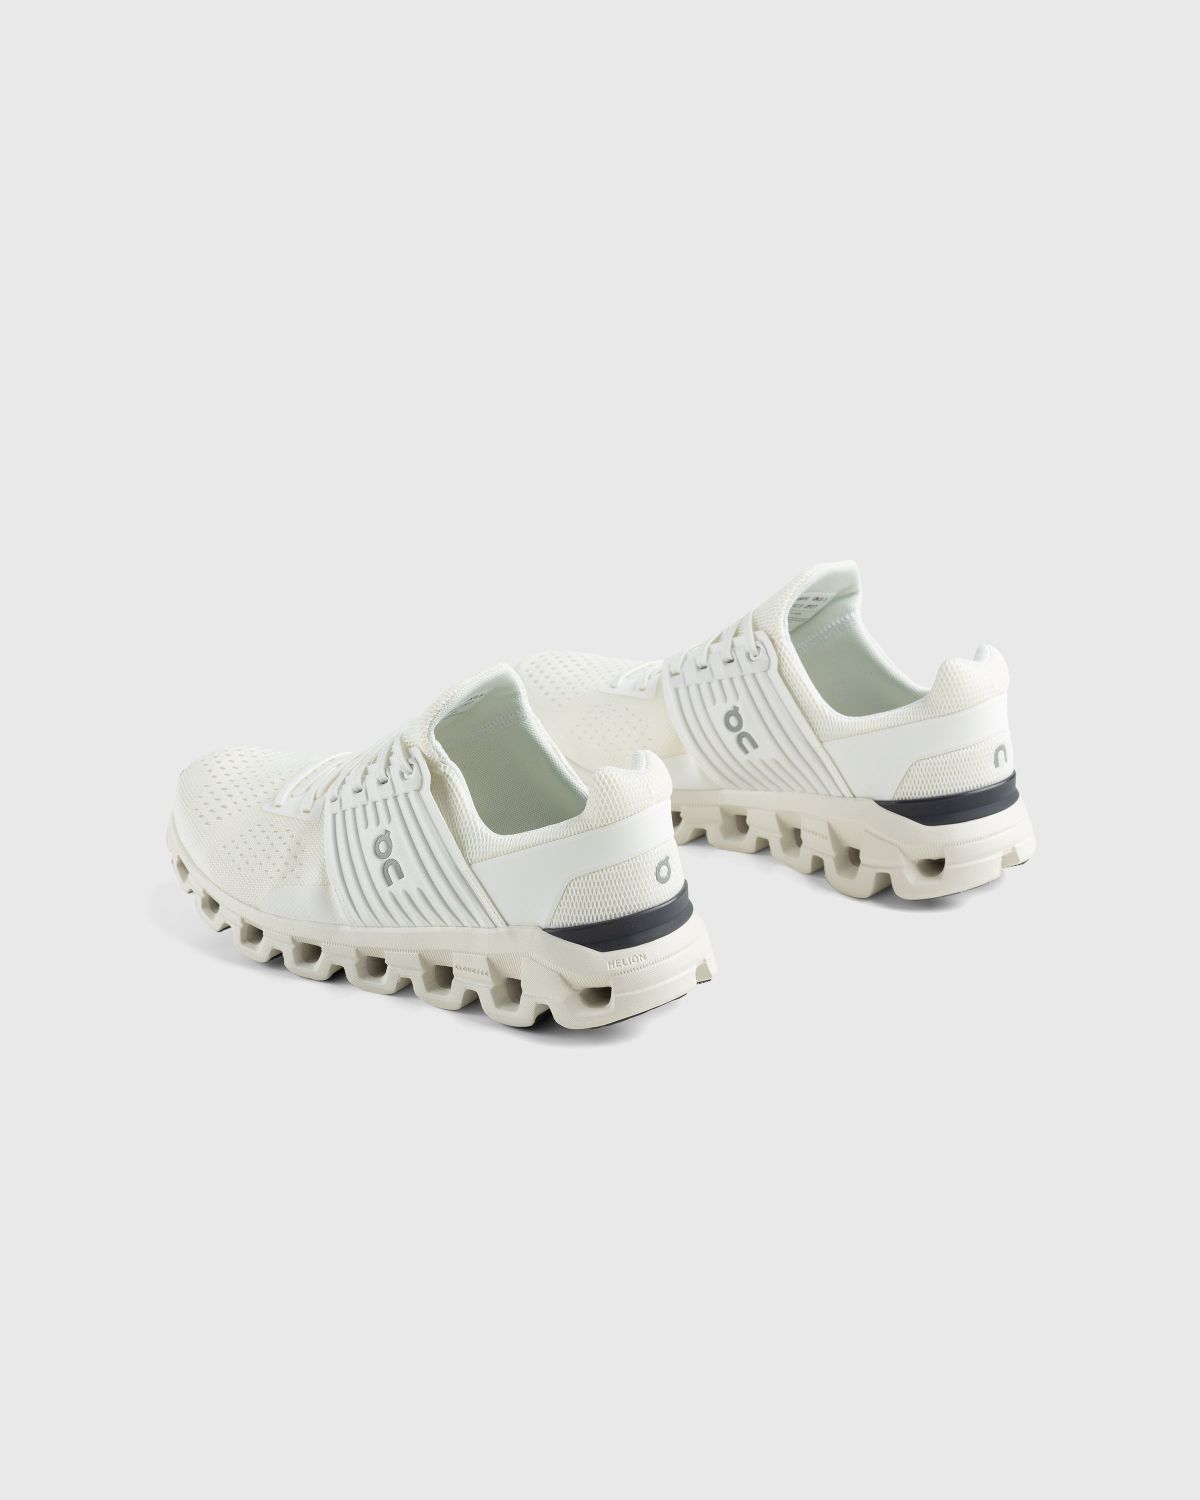 On – Cloudswift All White - Low Top Sneakers - White - Image 4